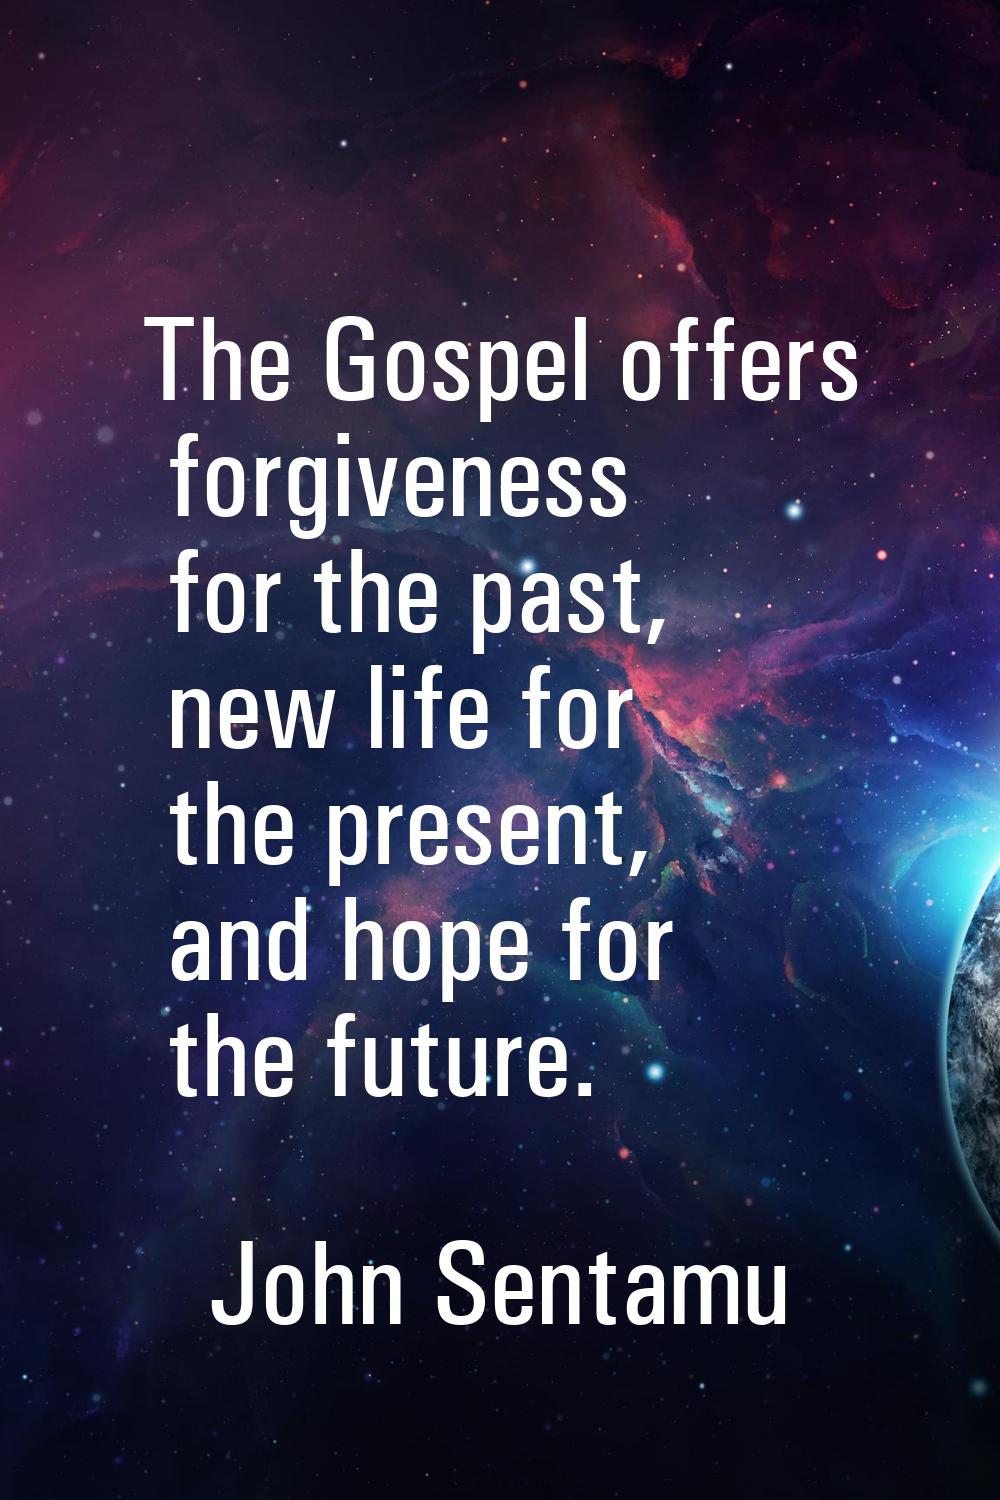 The Gospel offers forgiveness for the past, new life for the present, and hope for the future.